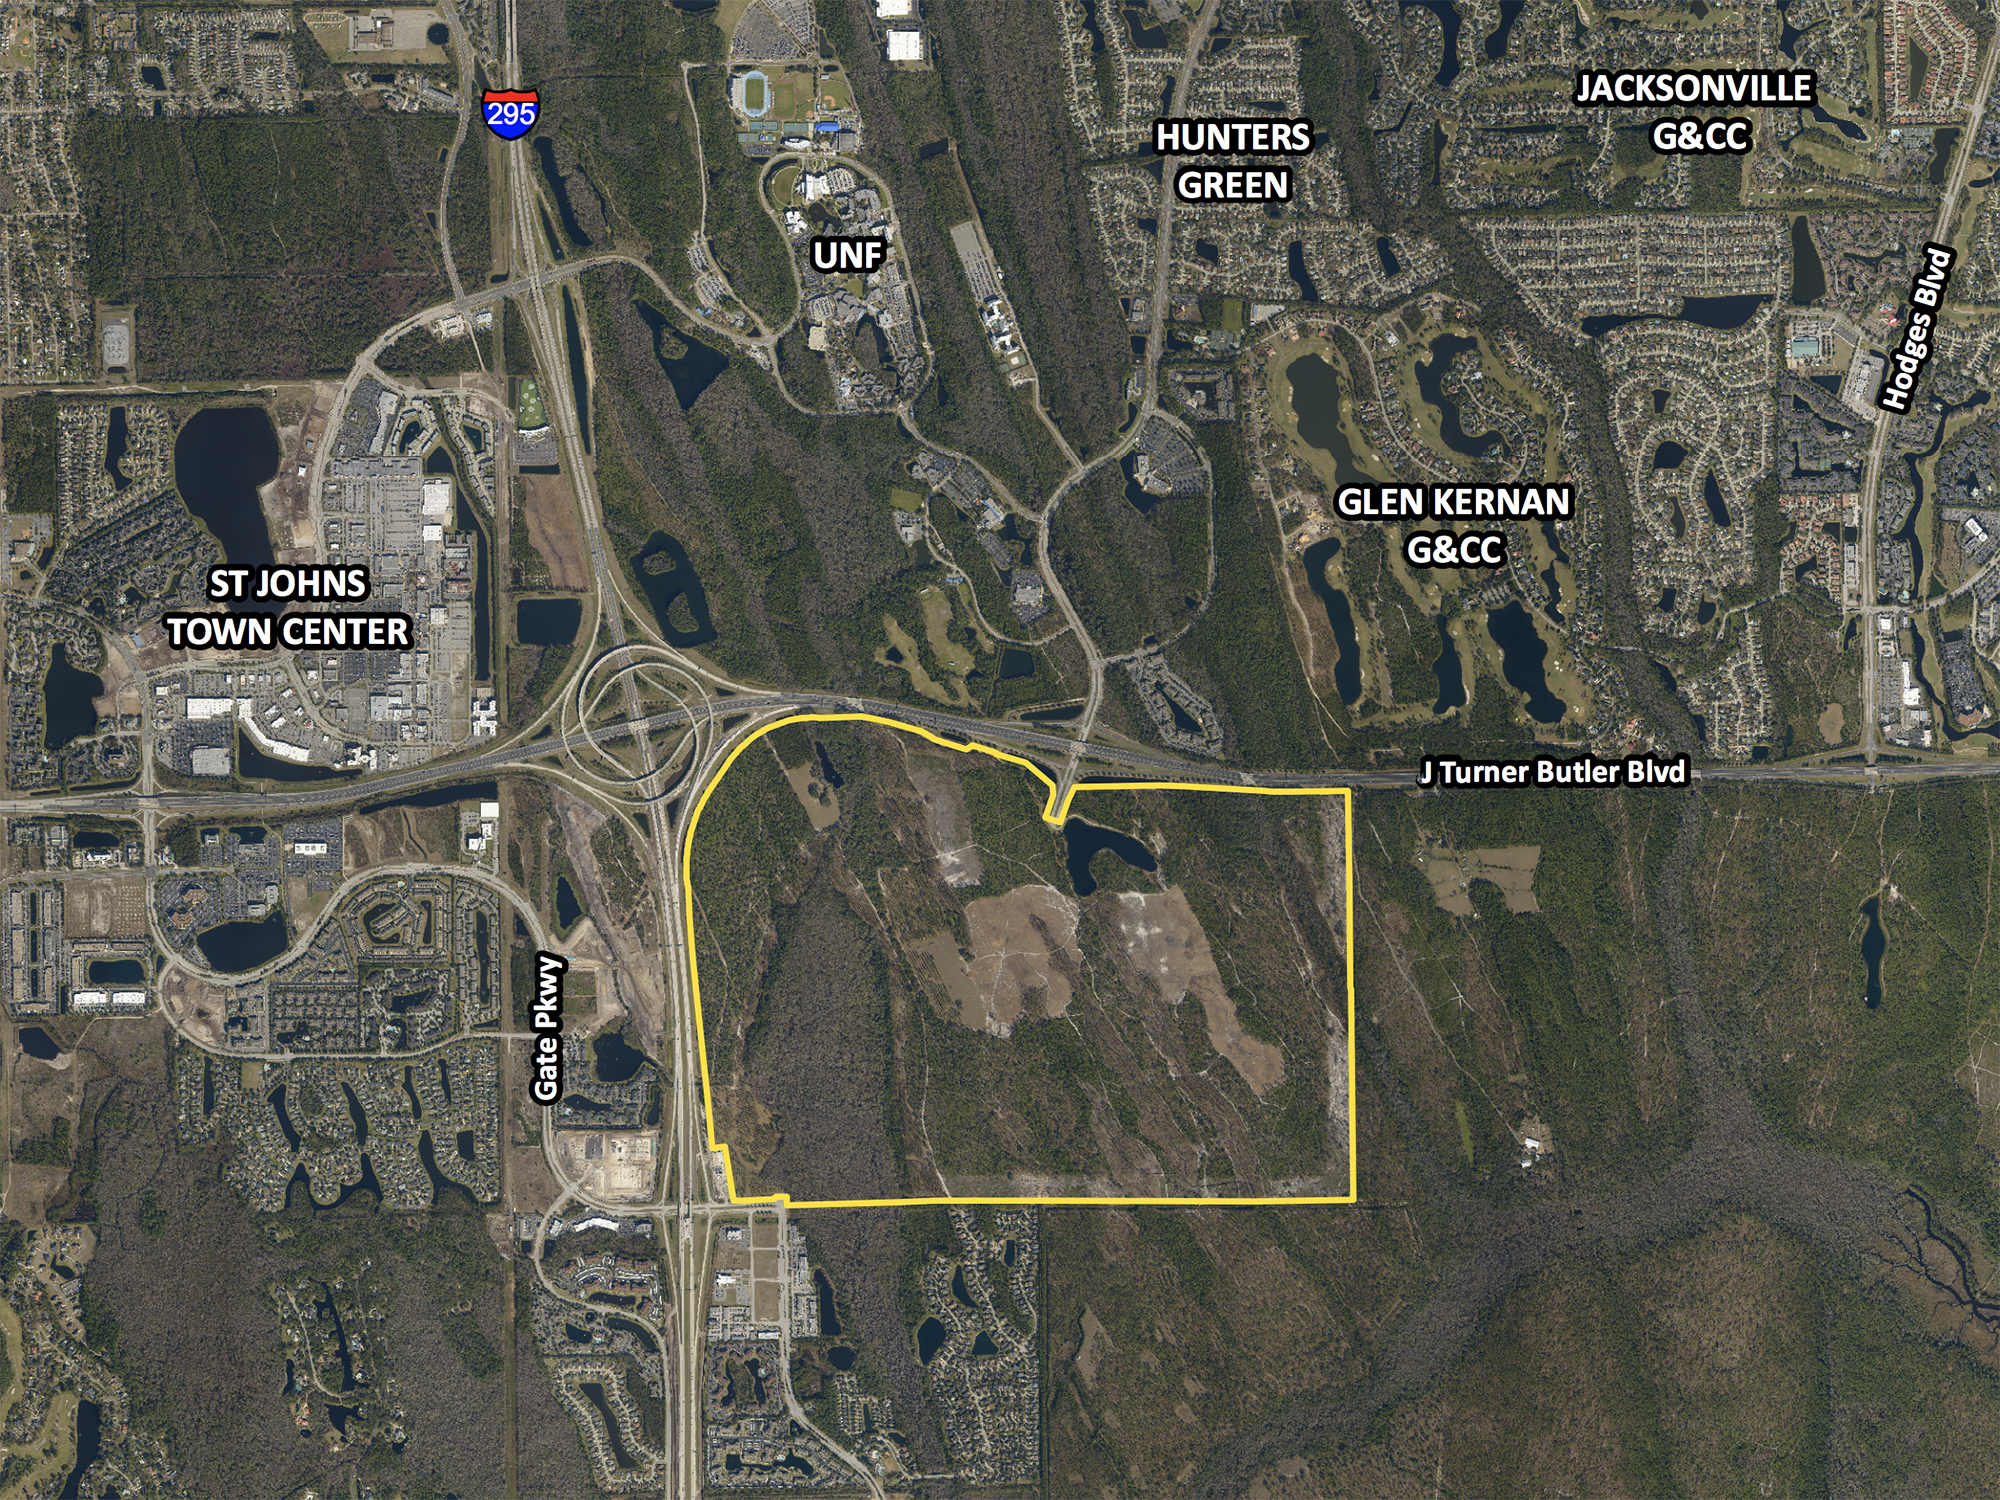 The Southeast Quadrant is near St. Johns Town Center and is south of the University of North Florida.